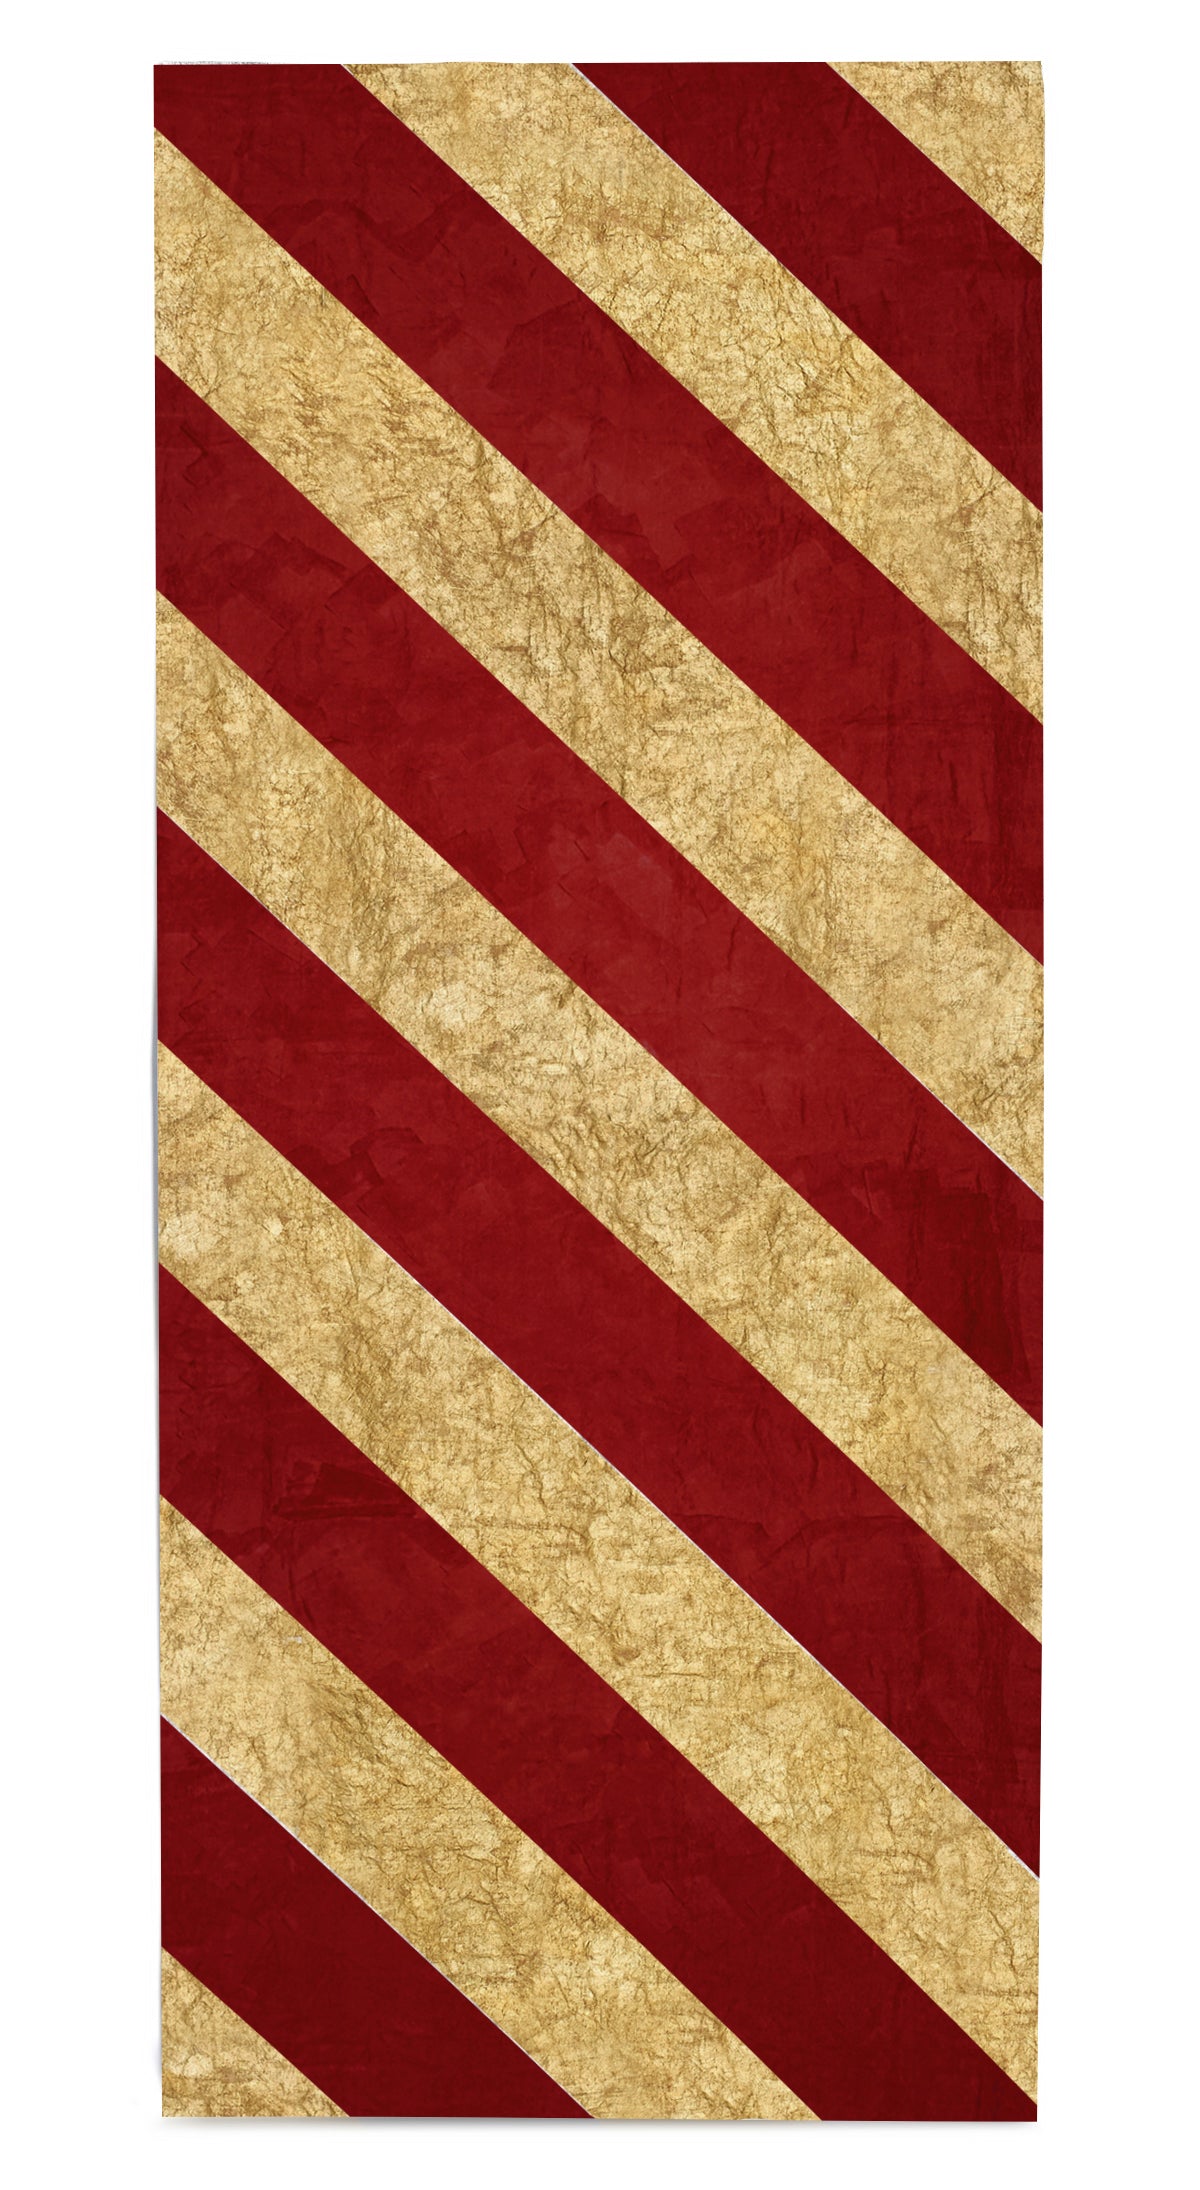 Stripe Linen Tablecloth in Gold and Claret Red